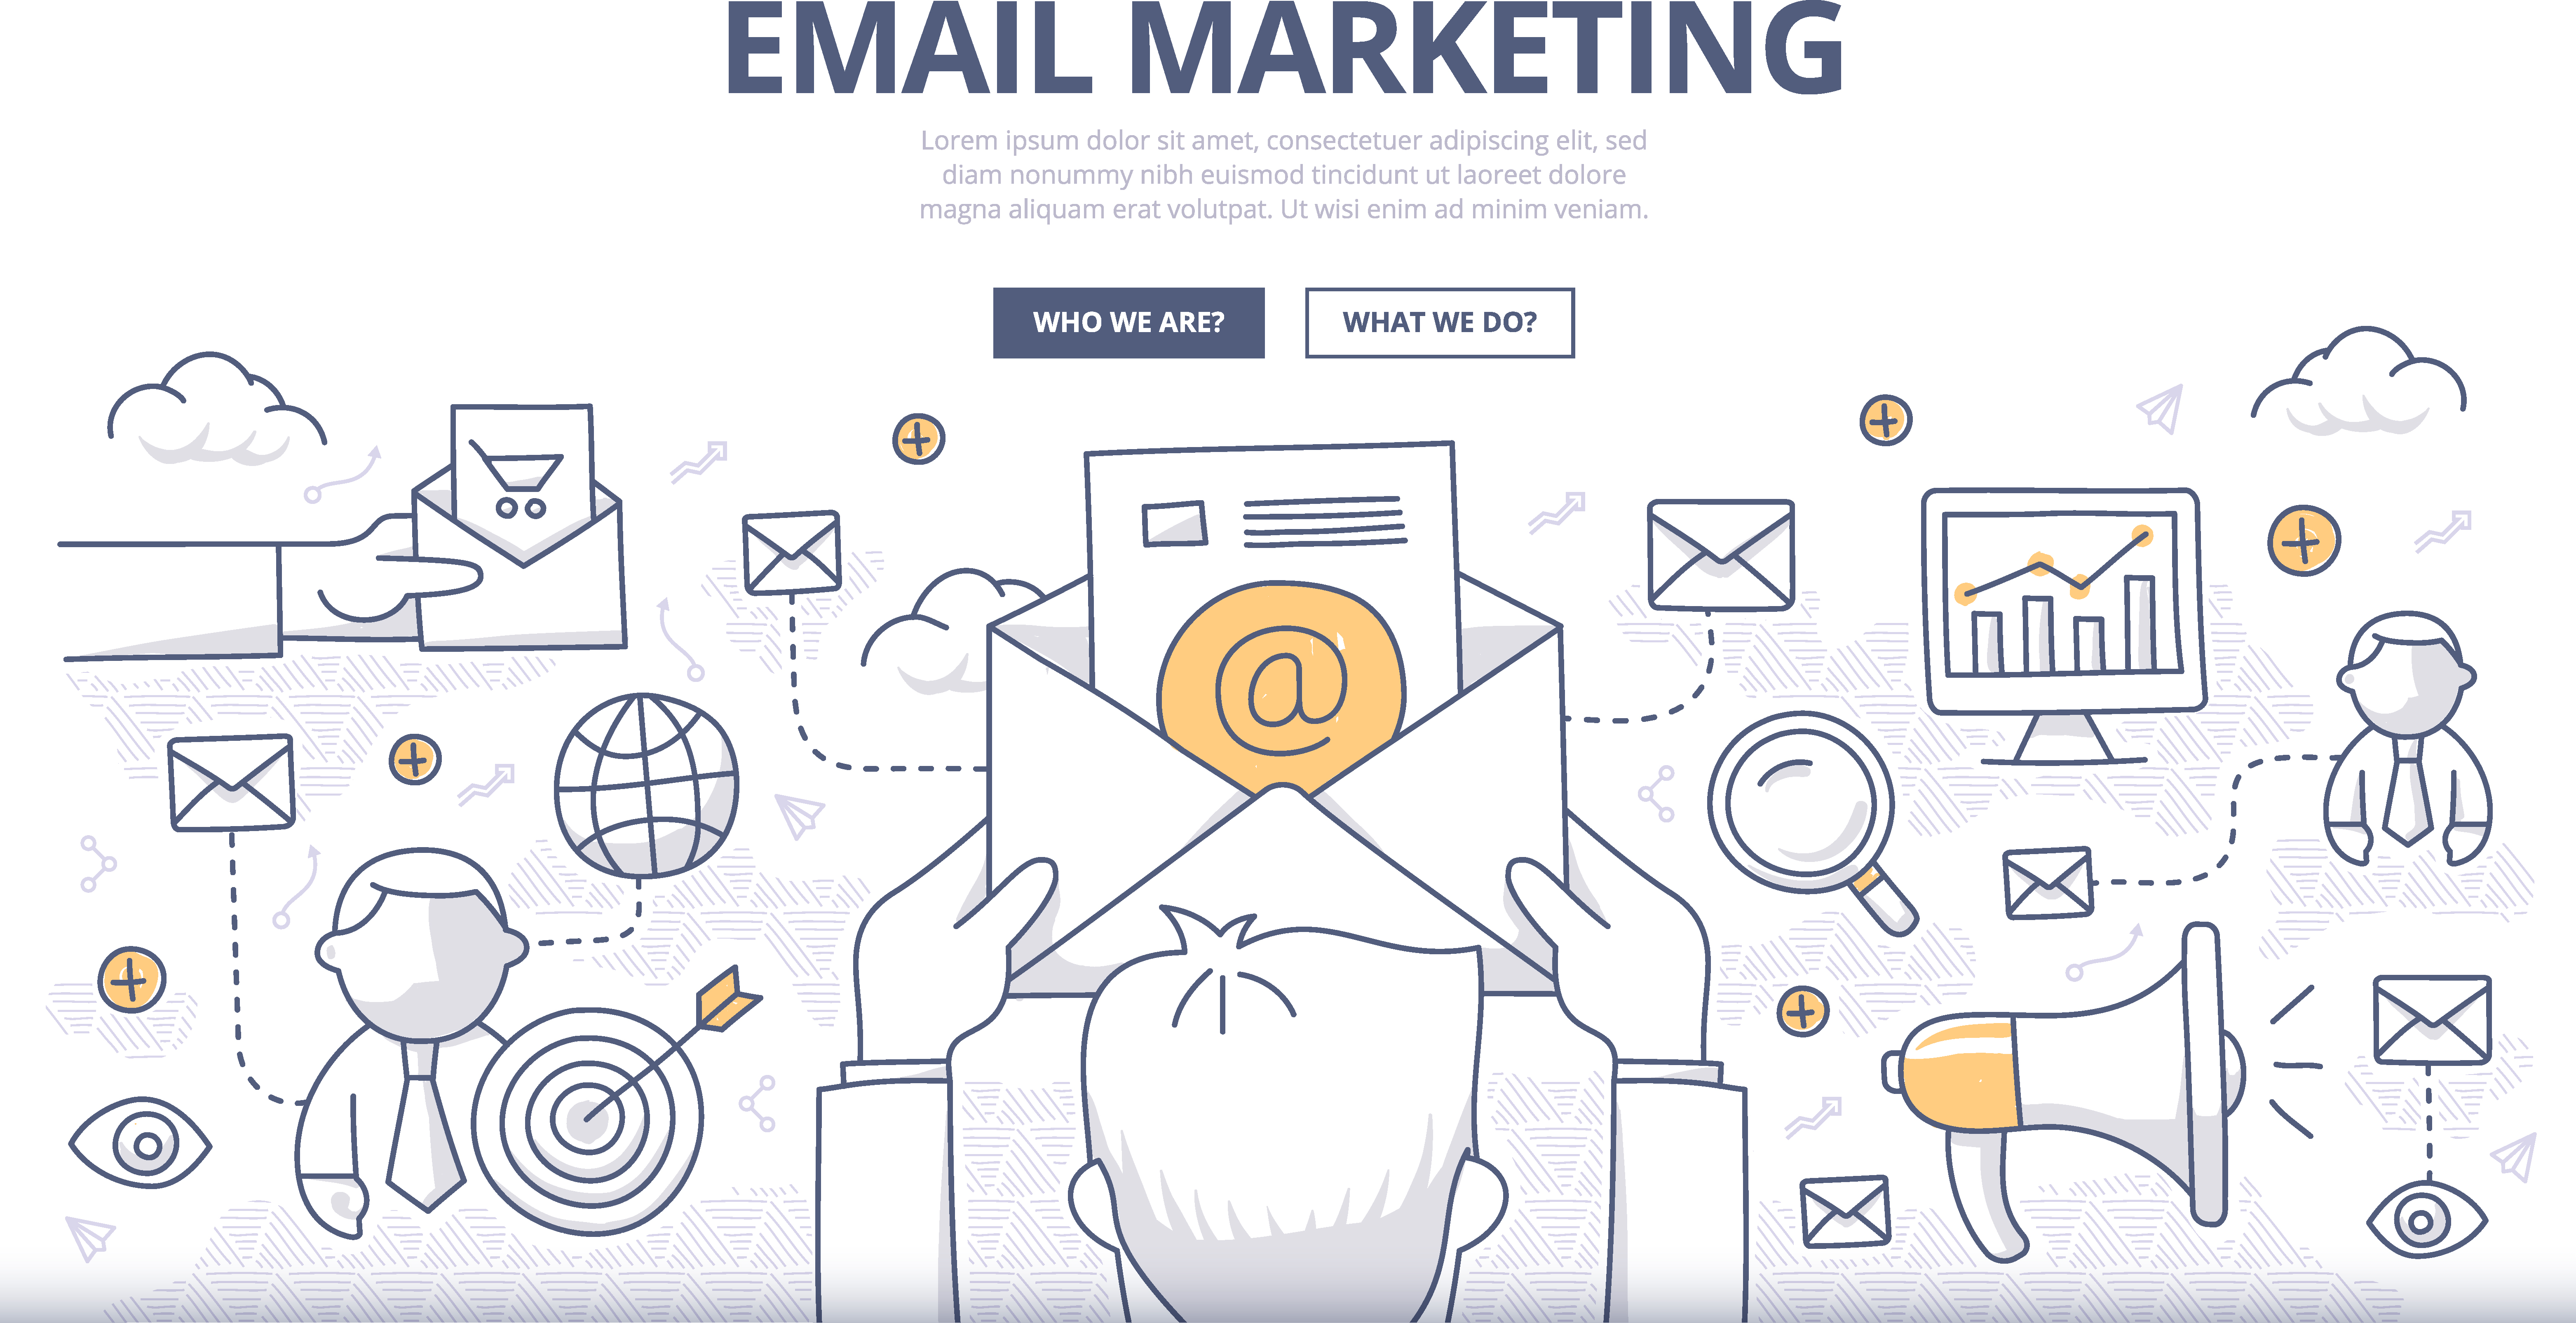 Email Marketing Software: A Pocket Guide to Your Brightest Options